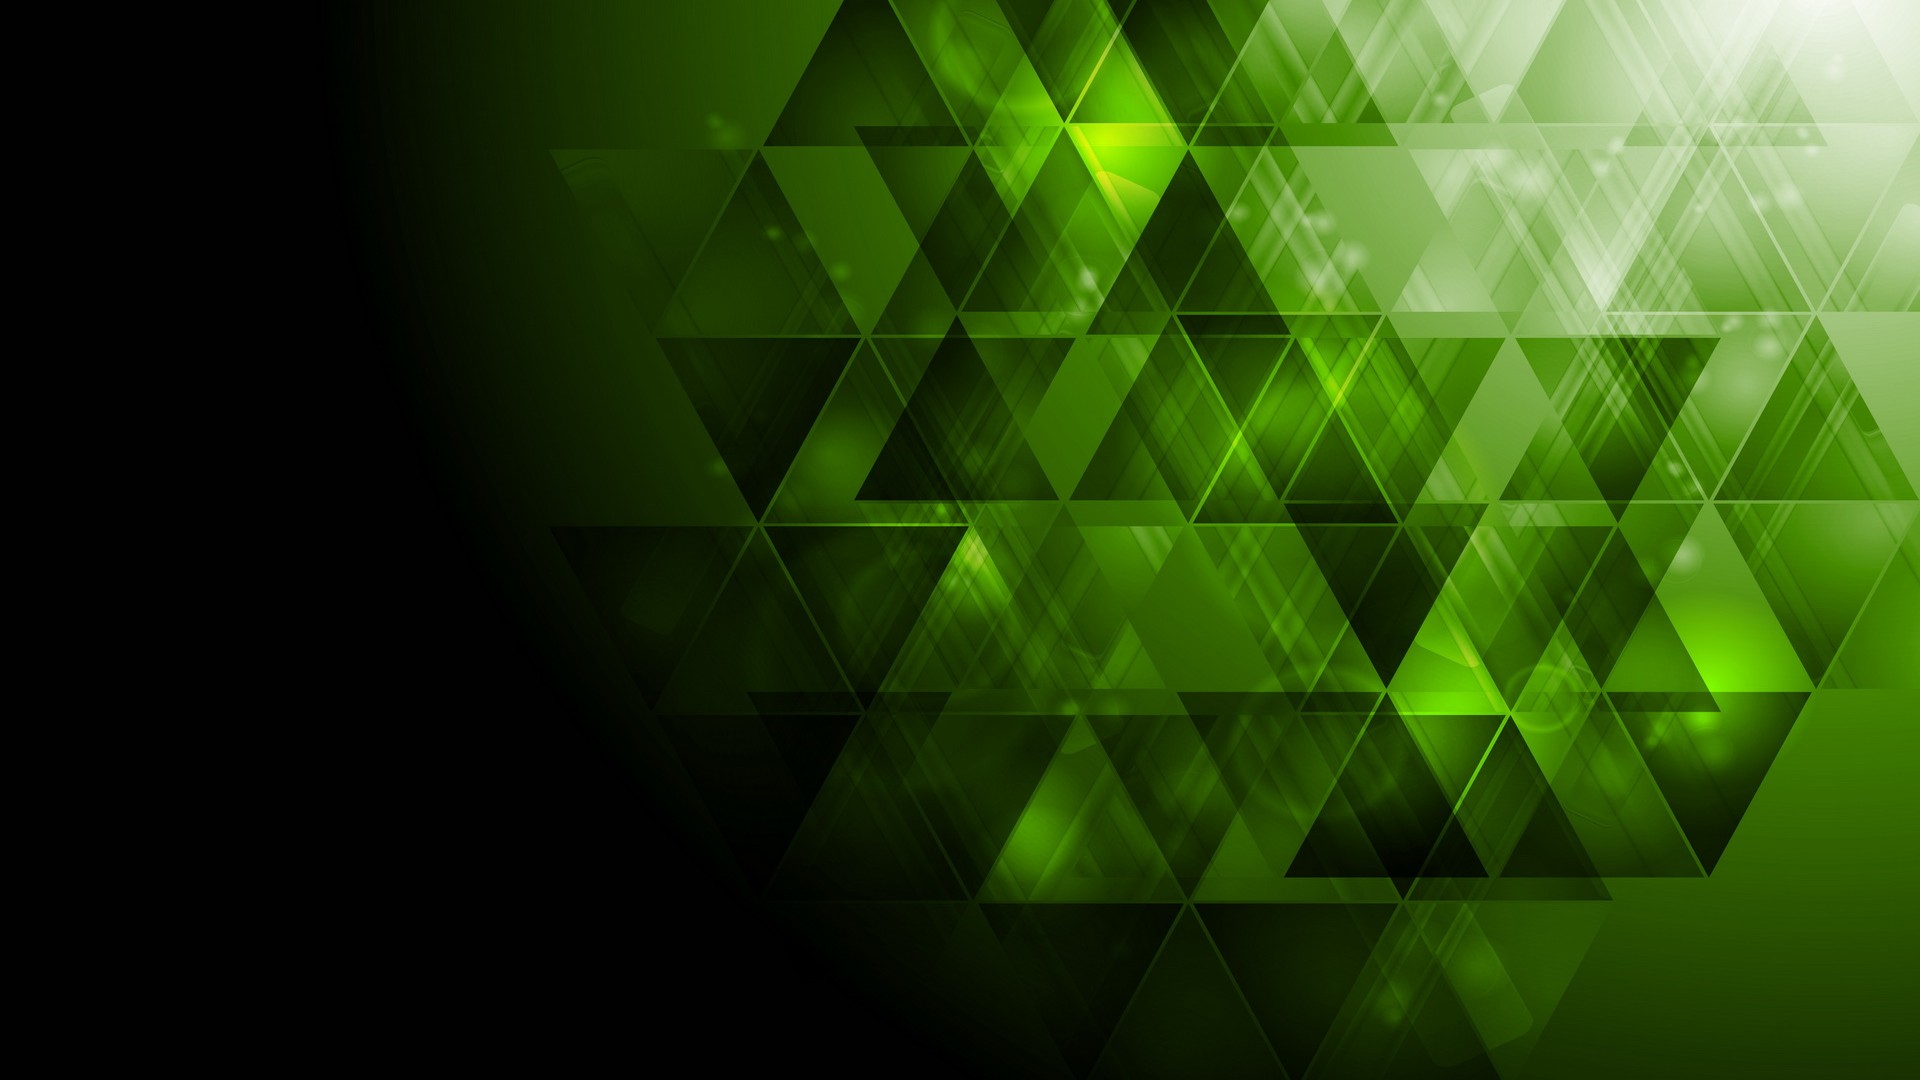 Black and Green Wallpaper For Desktop with resolution 1920X1080 pixel. You can use this wallpaper as background for your desktop Computer Screensavers, Android or iPhone smartphones